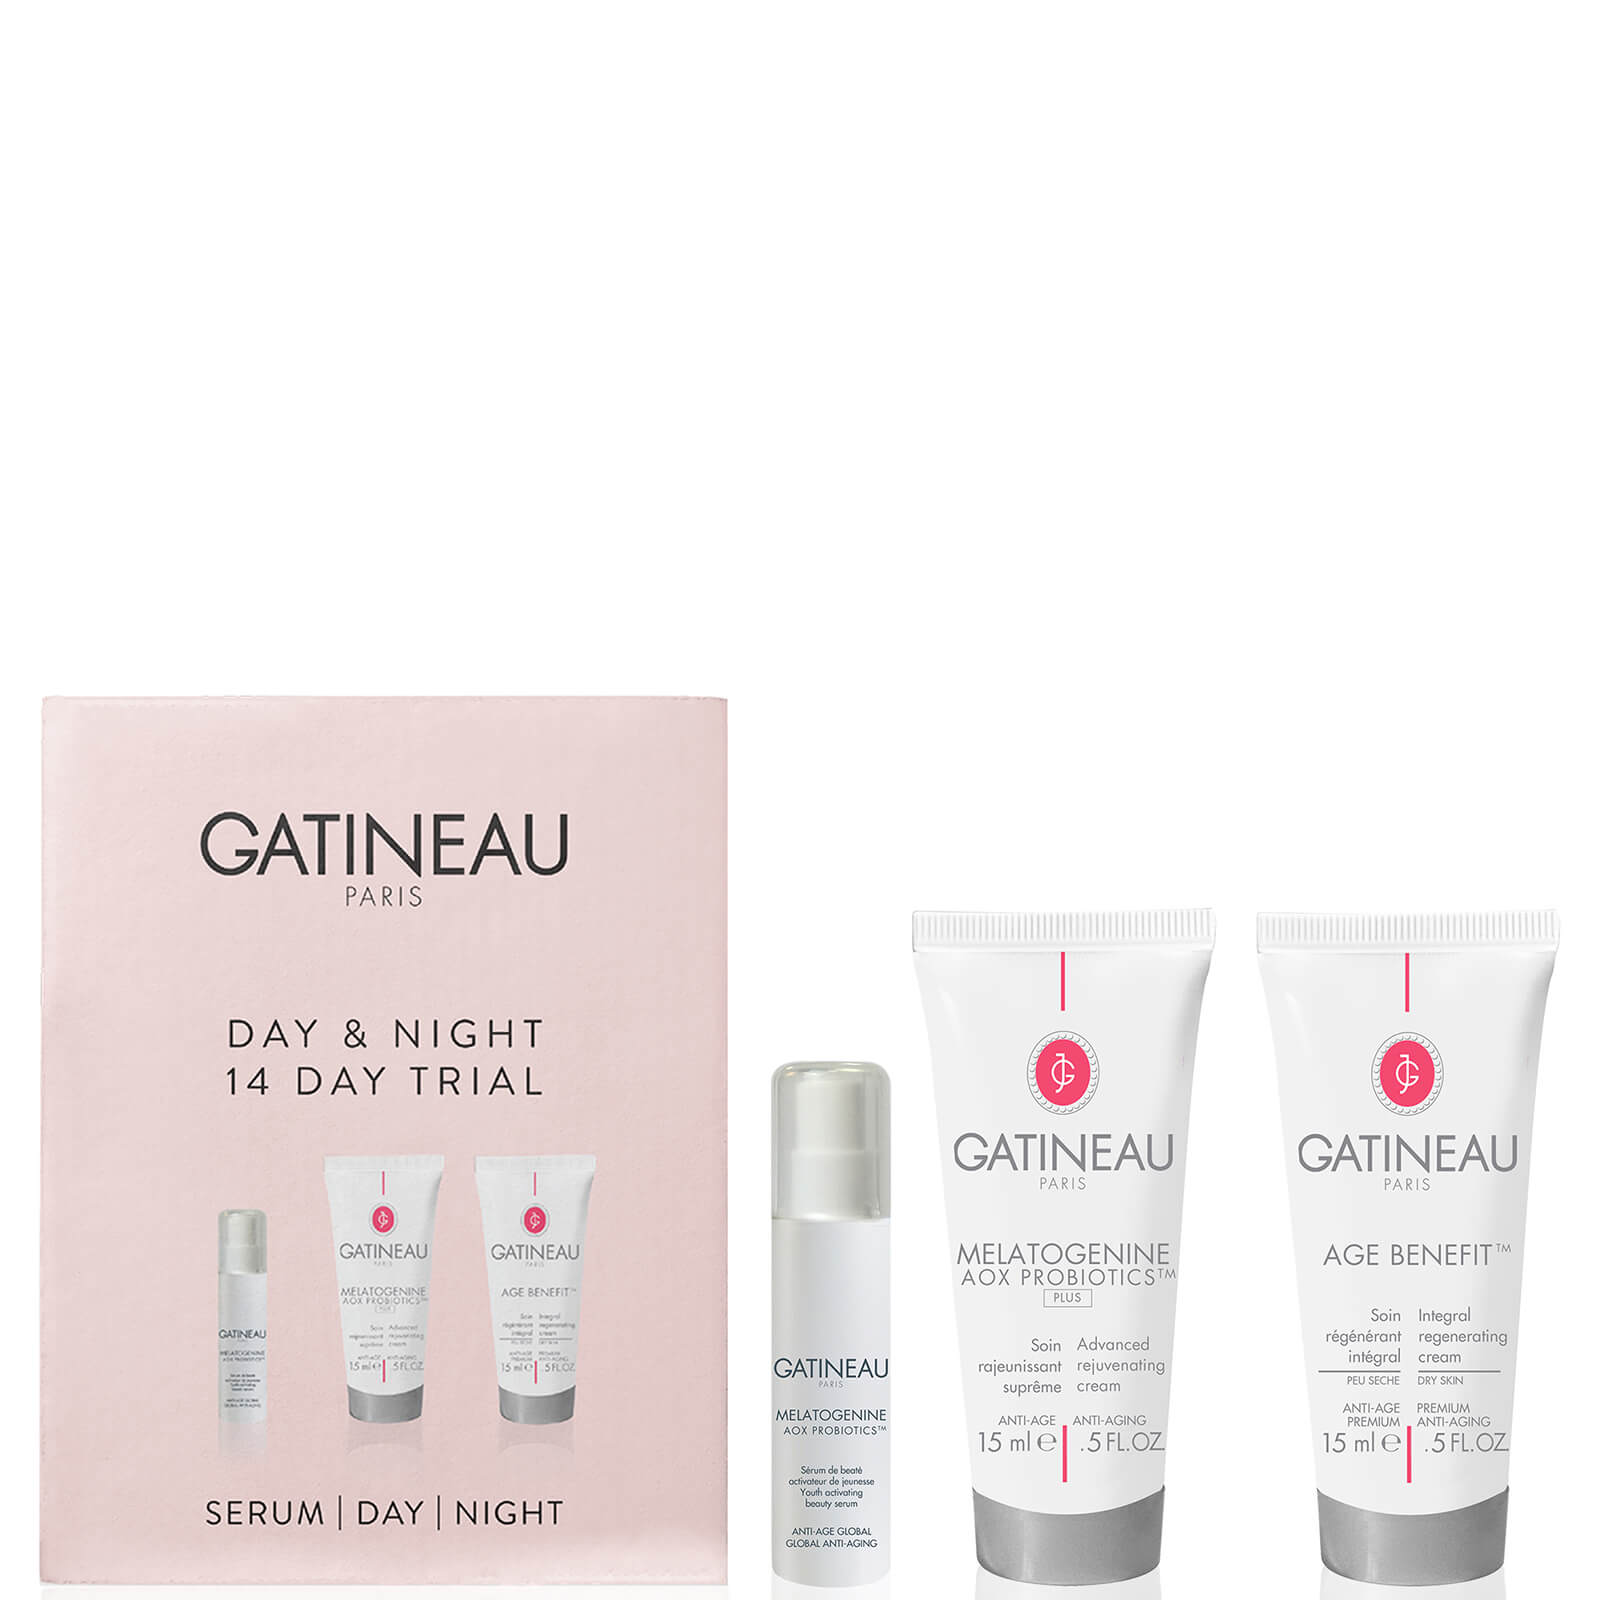 Gatineau Day and Night Trial Kit